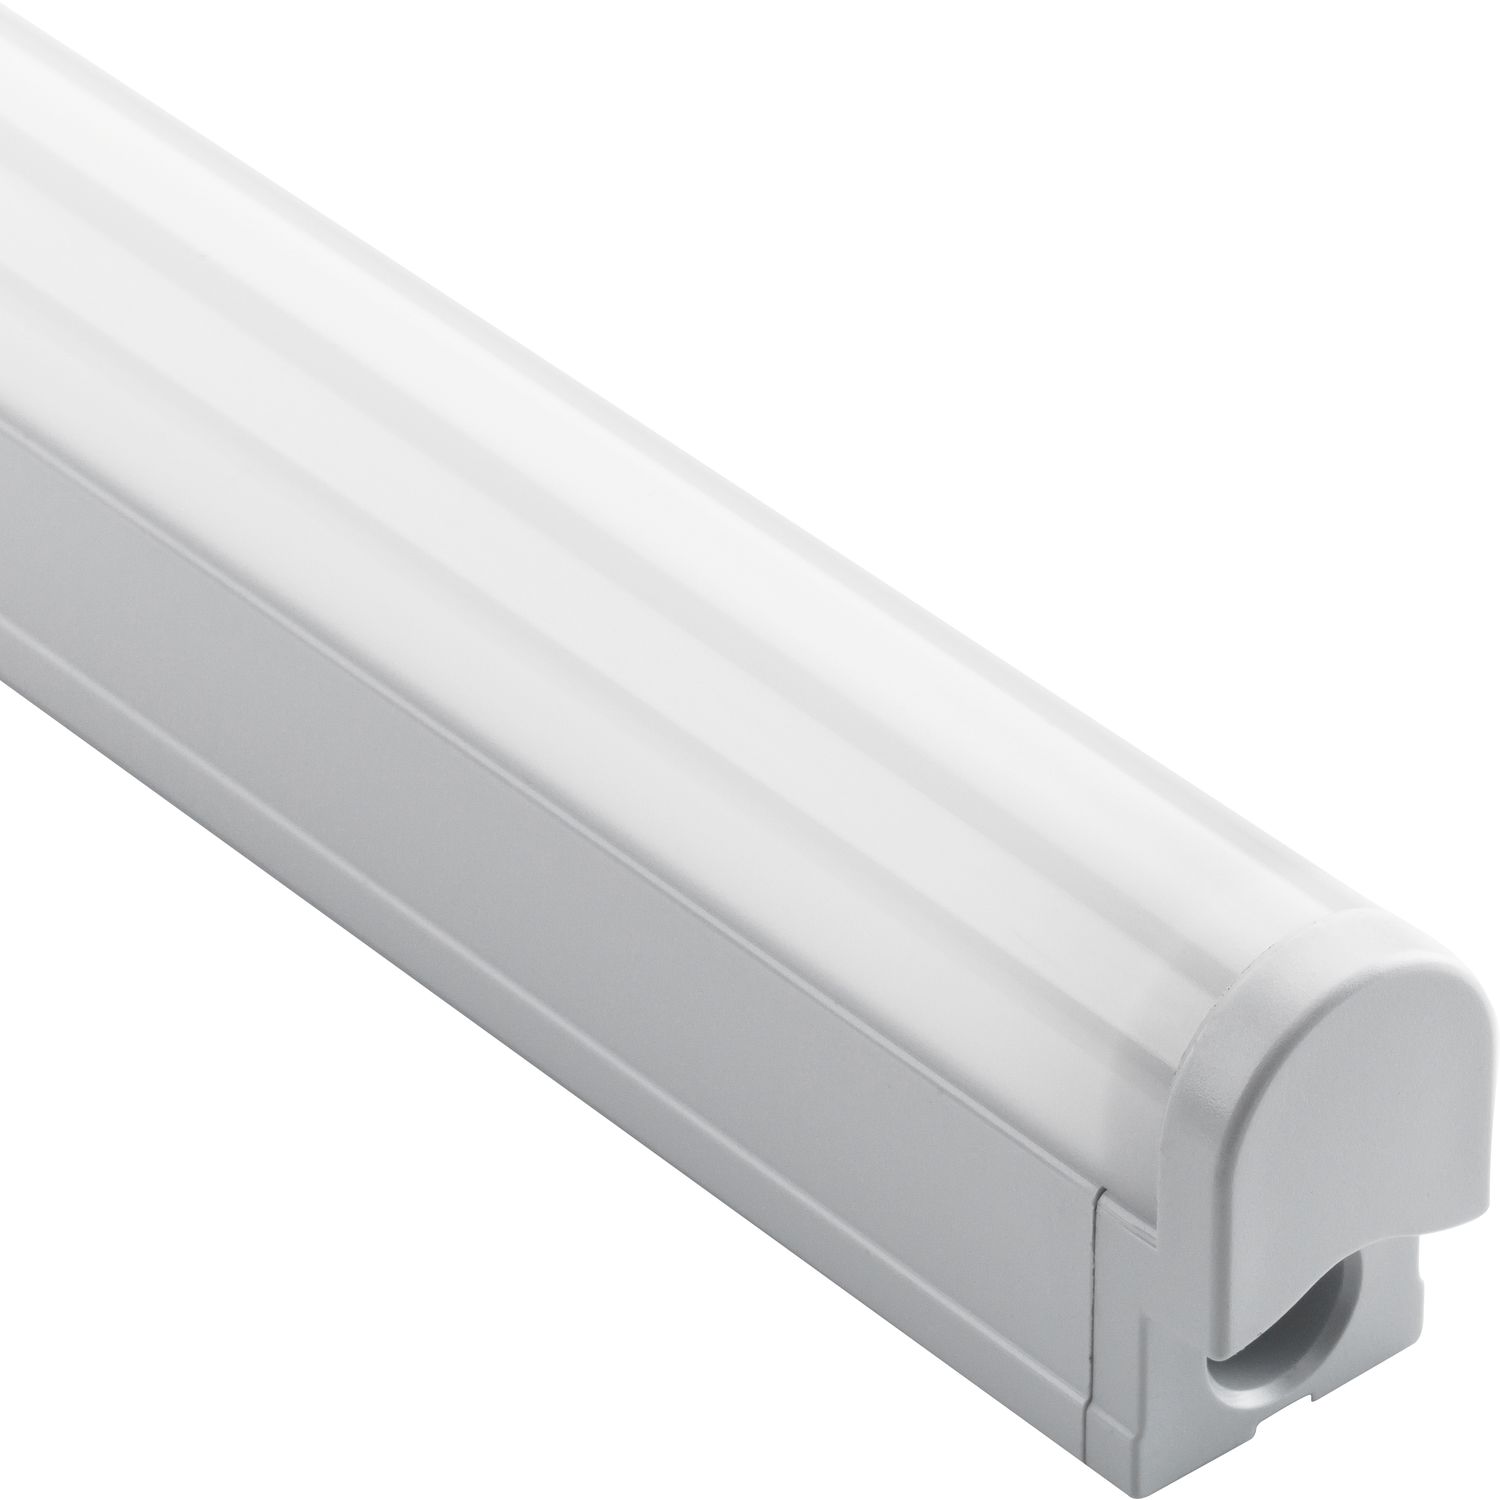 Lampada sottopensile LD 8021 A 9W 3000K 546 mm bianco